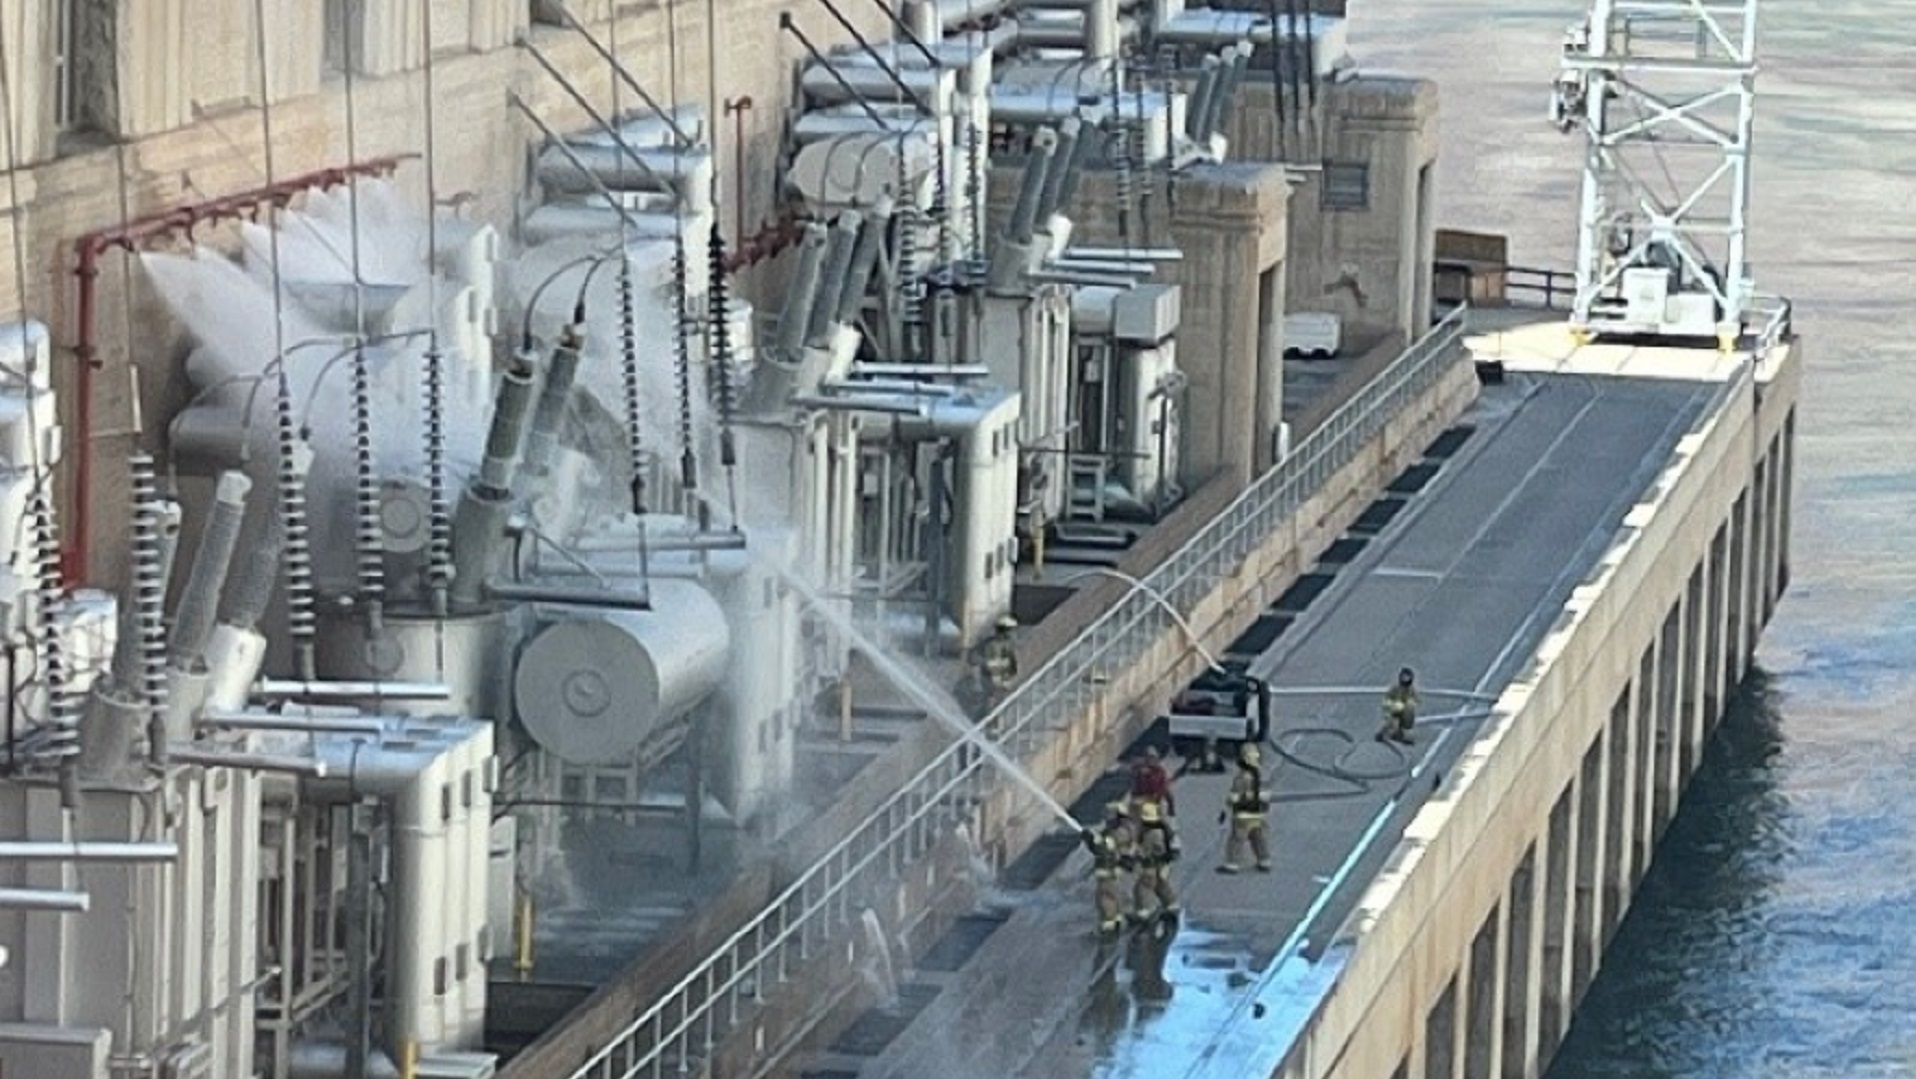 Firefighters spray water on a transformer that caught fire at Hoover Dam, July 19, 2022.